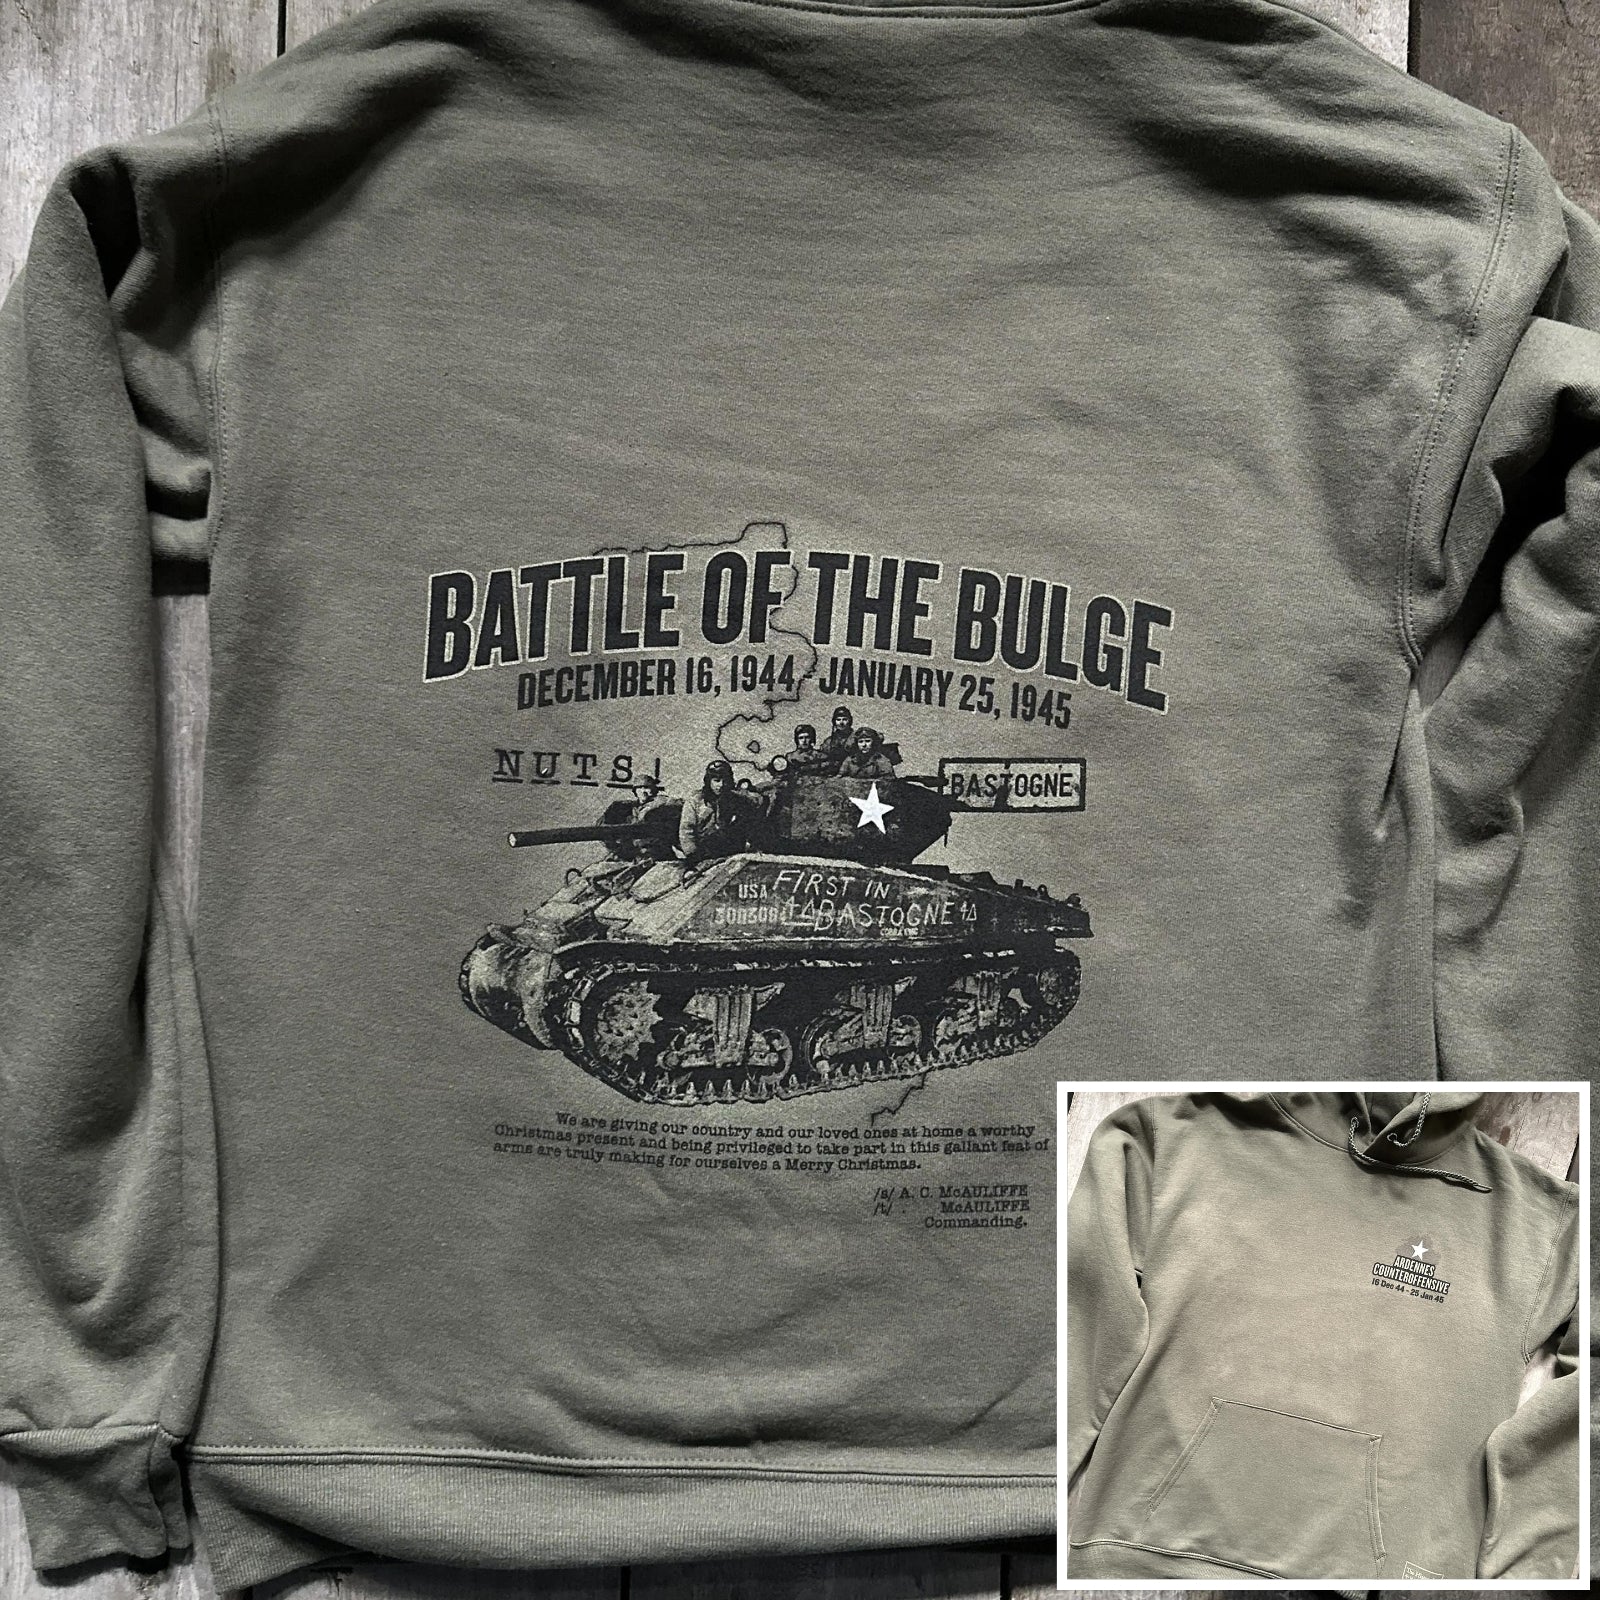 The Battle of the Bulge Hooded sweatshirt from The History List store